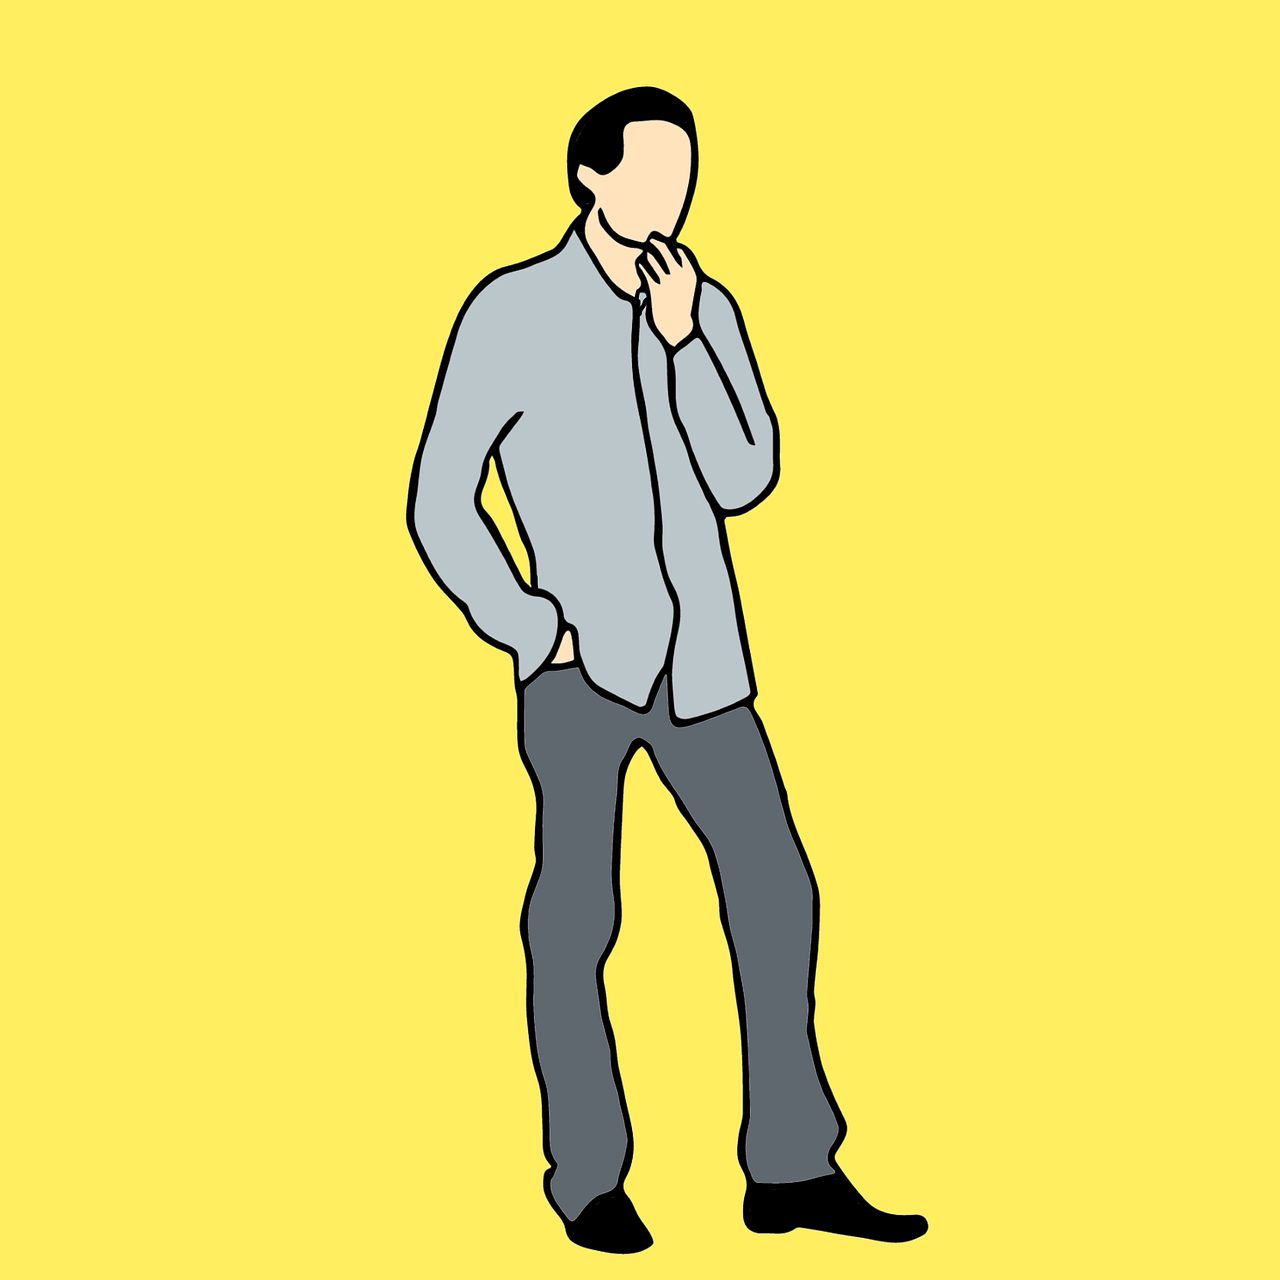 a man standing and talking on a cell phone, figuration libre, thinking pose, yellow, photoillustration, illustration]